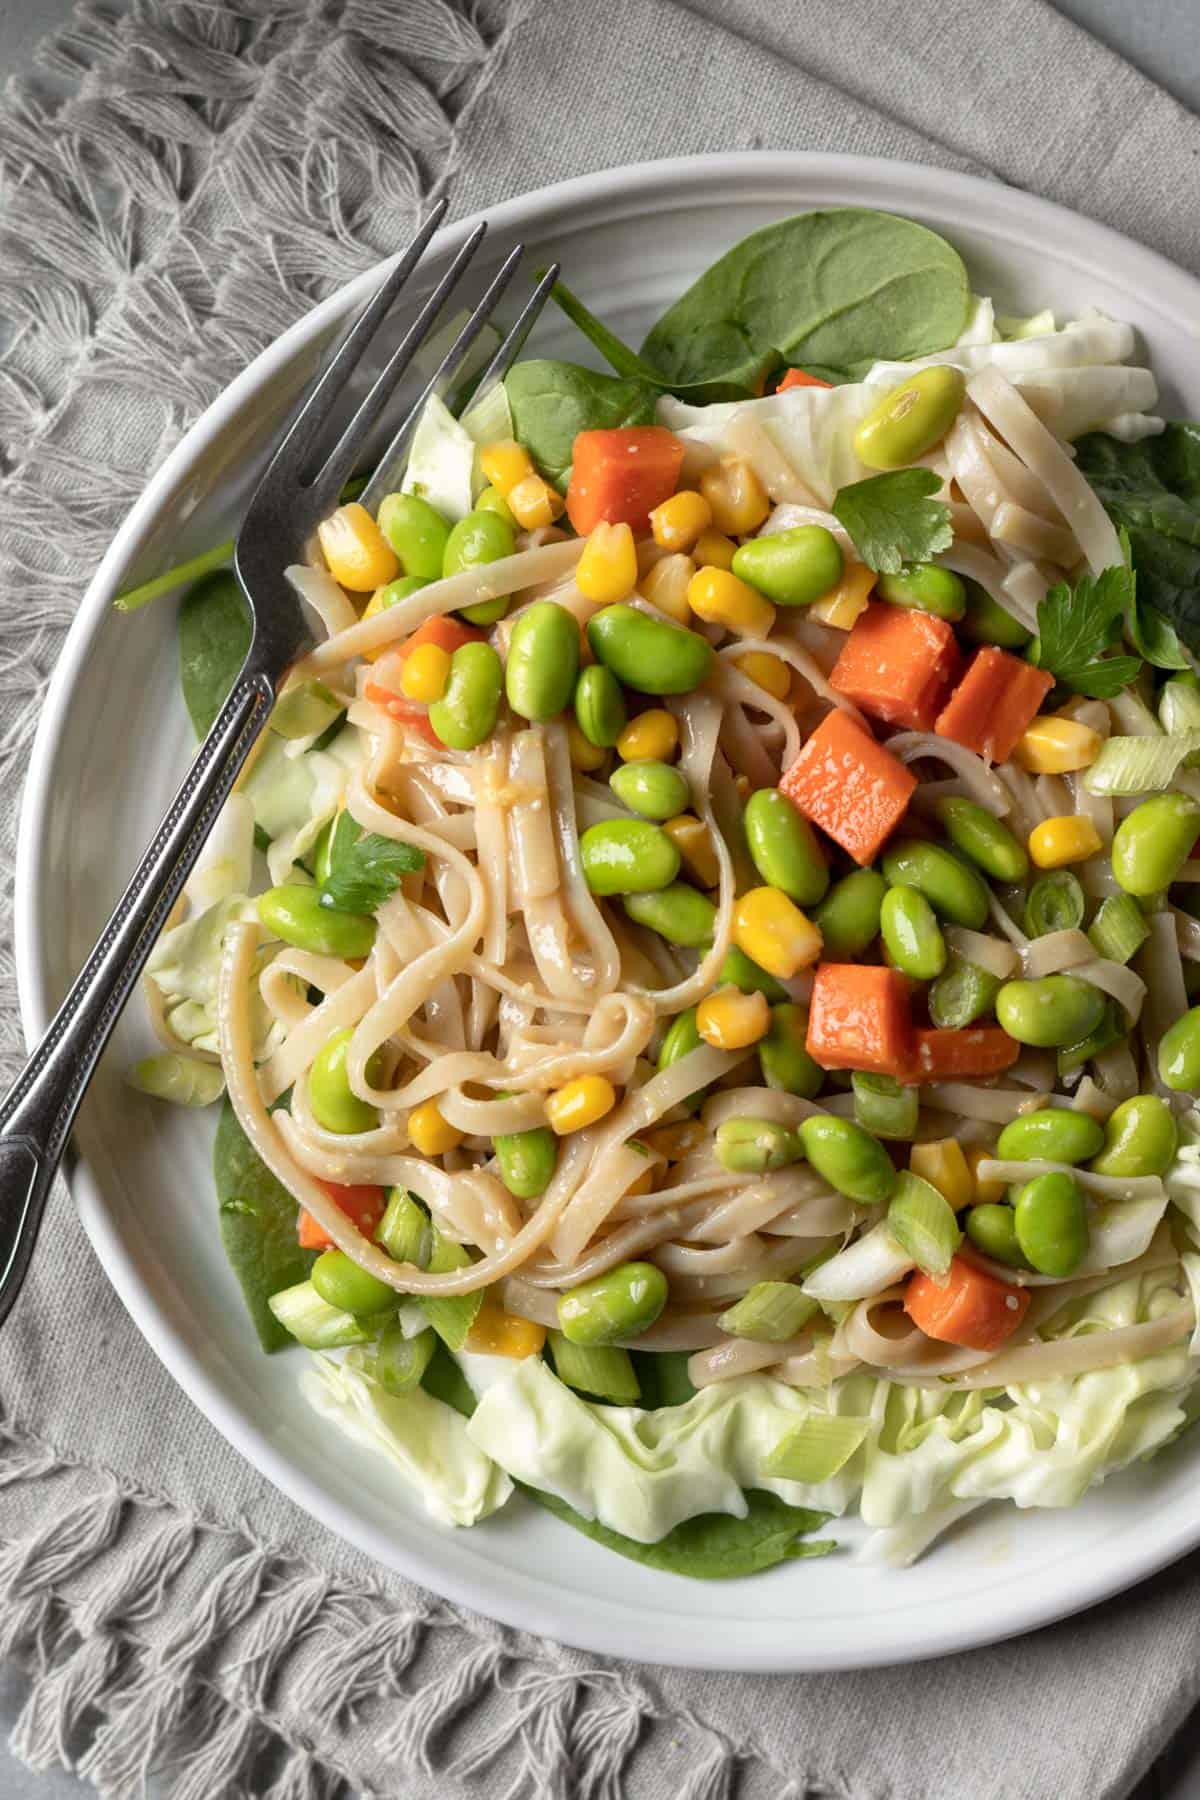 brown rice noodles with vegetables and miso sauce on a plate.